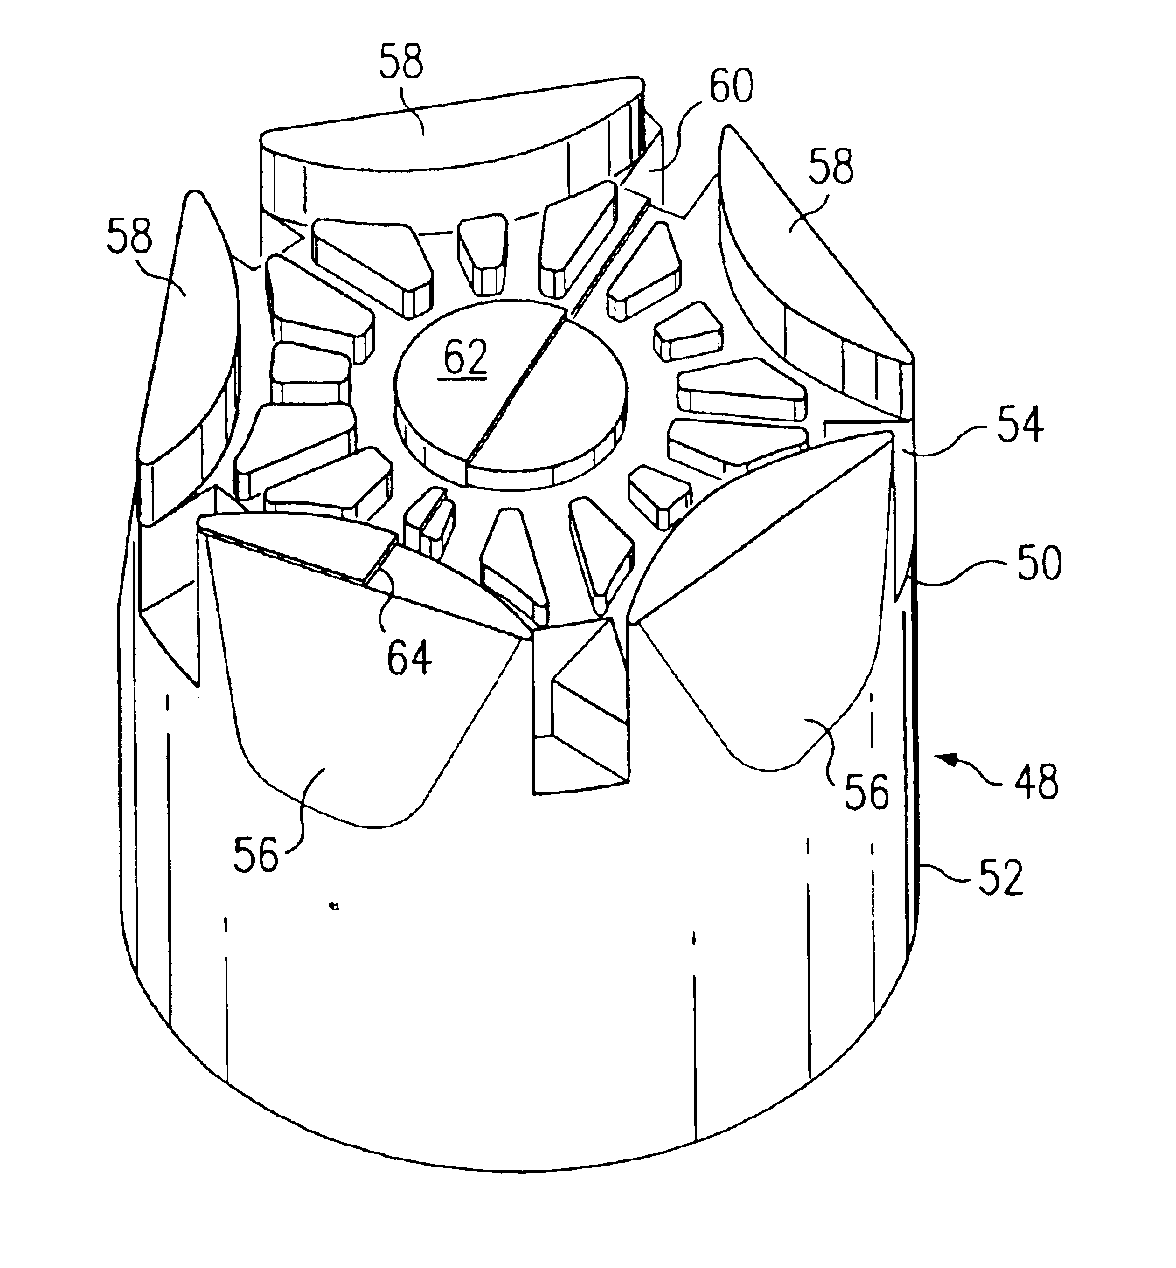 Low-contact area cutting element